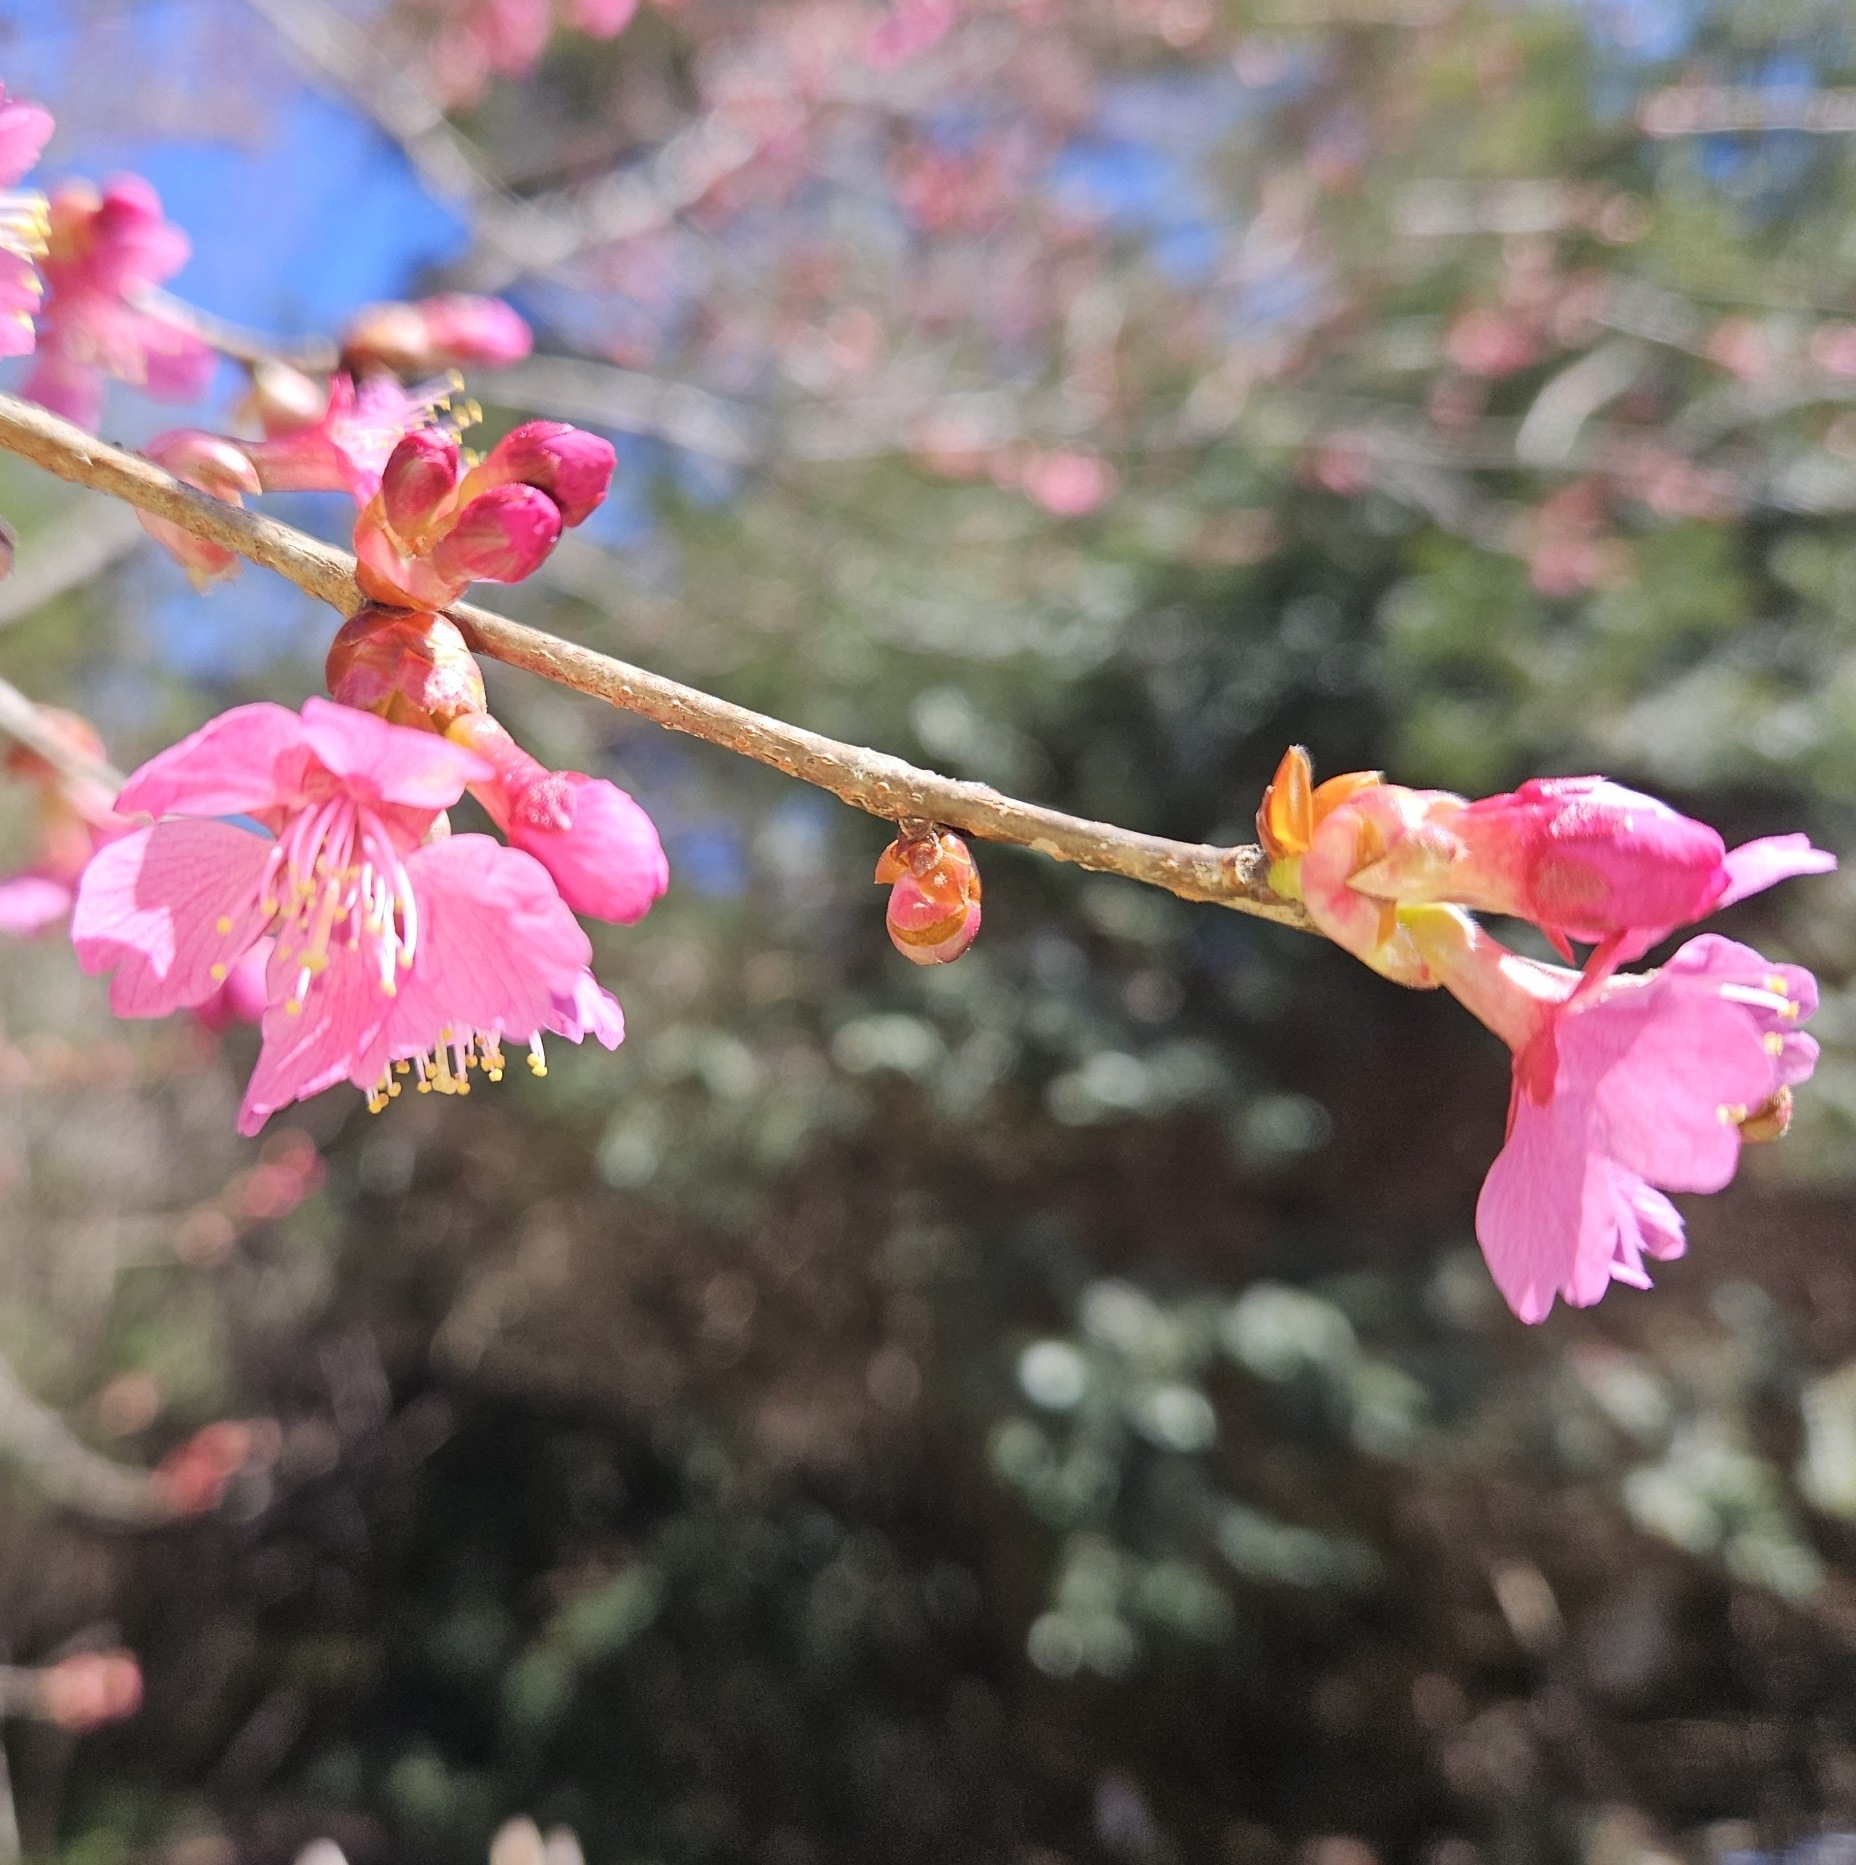 Signs of spring are blossoming across the region